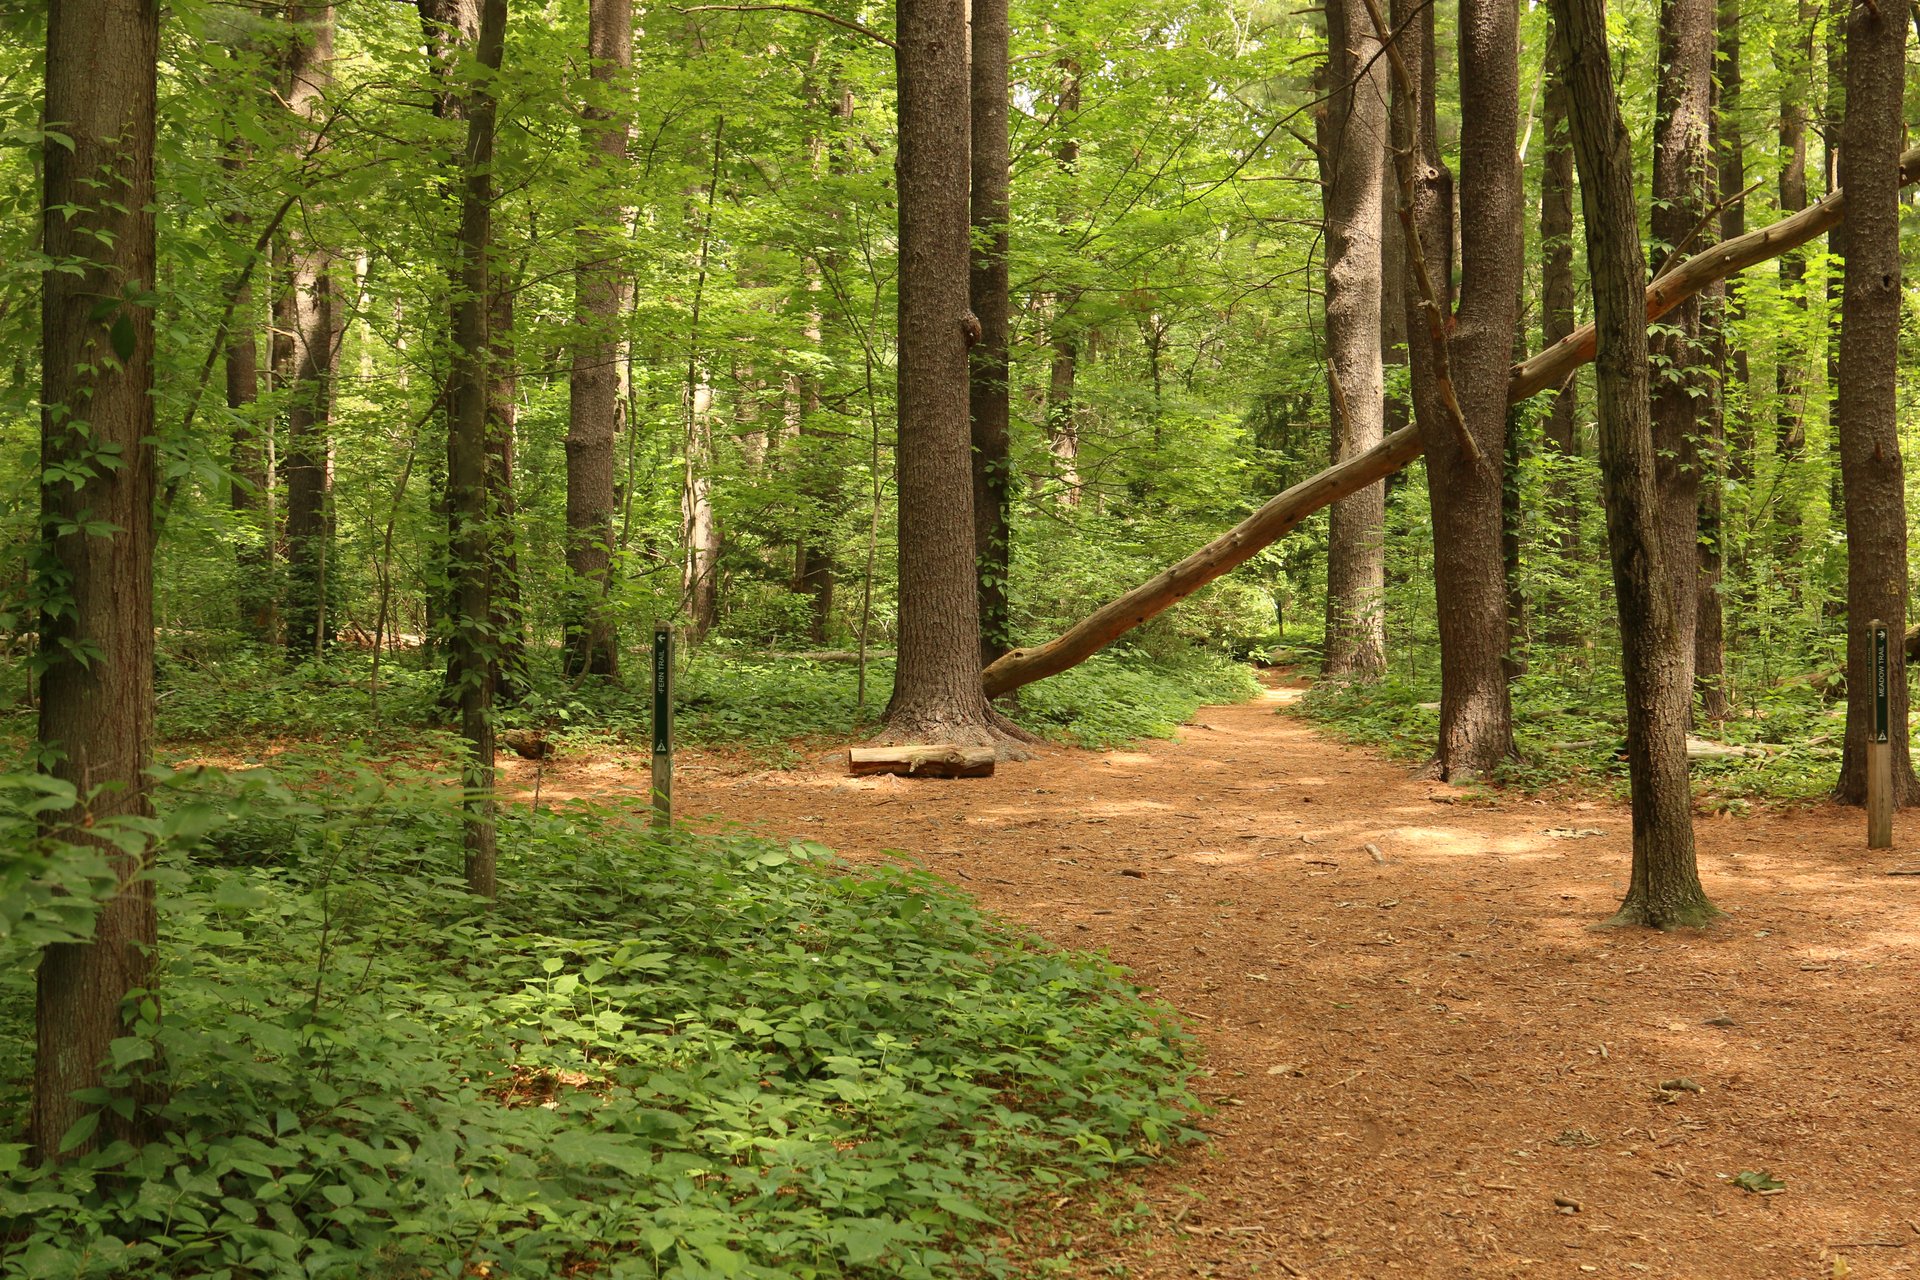 A trail curving to the left in a dense forest. Small green plants cover the edges of the trail and forest floor.